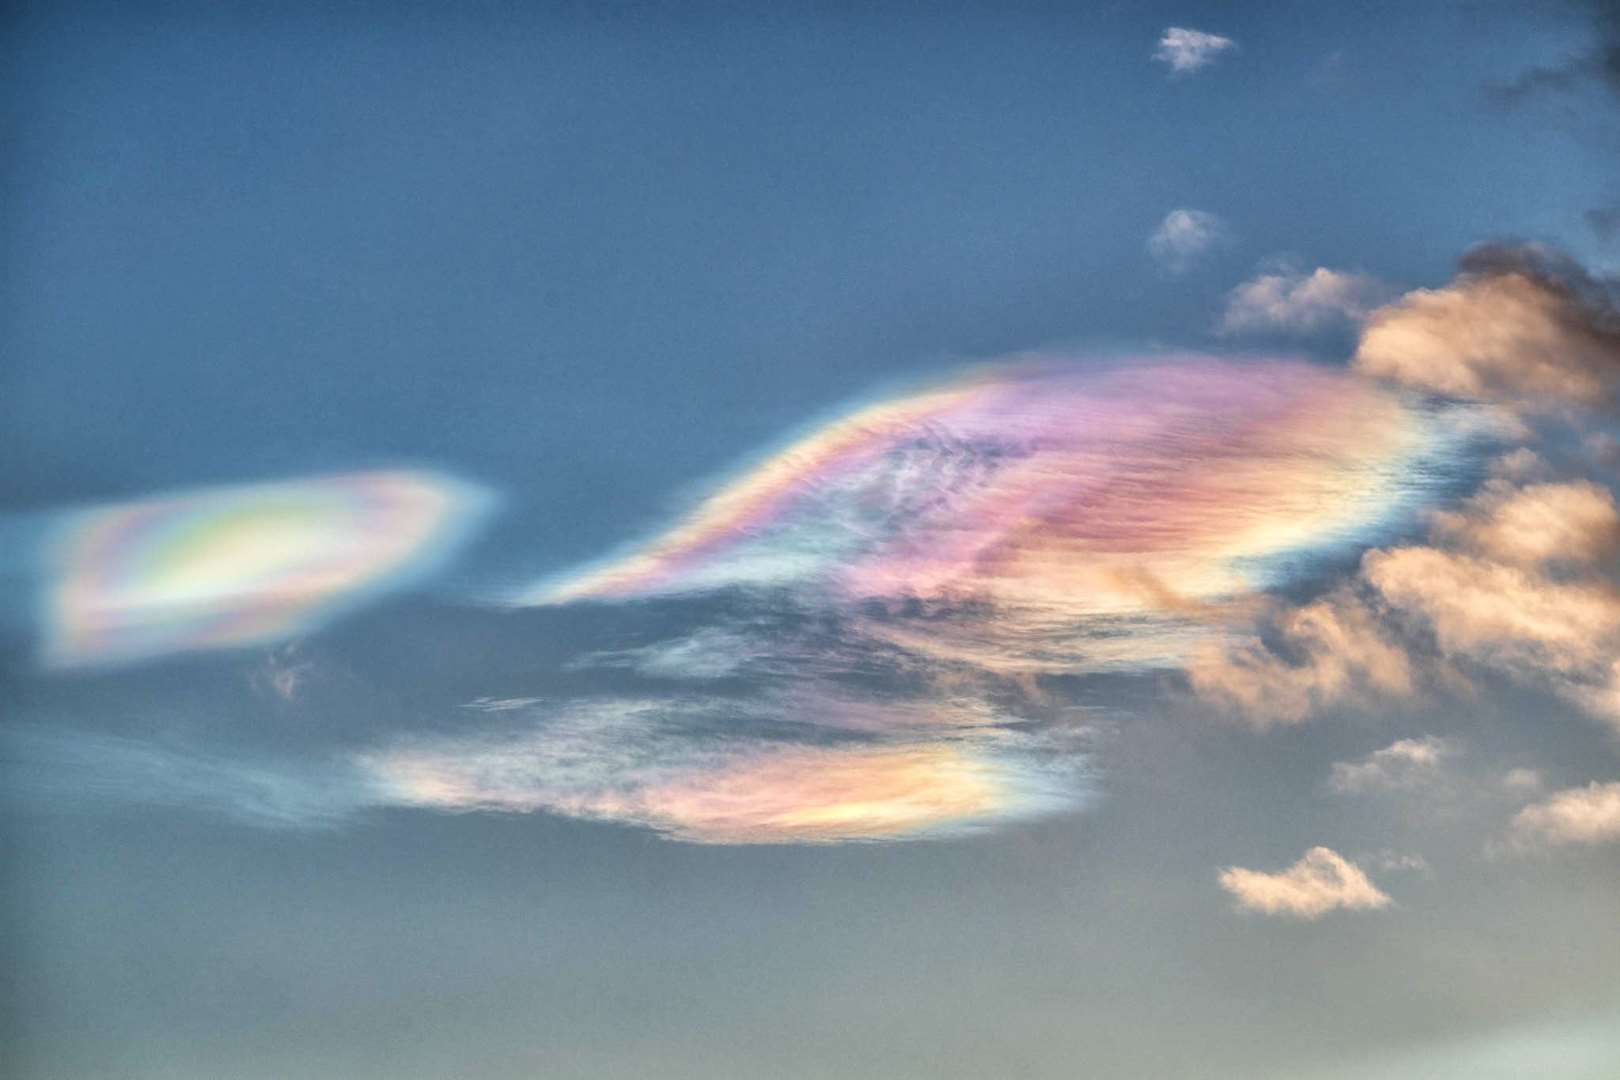 David Proudfoot took this picture in Thurso of the nacreous clouds on December 24.